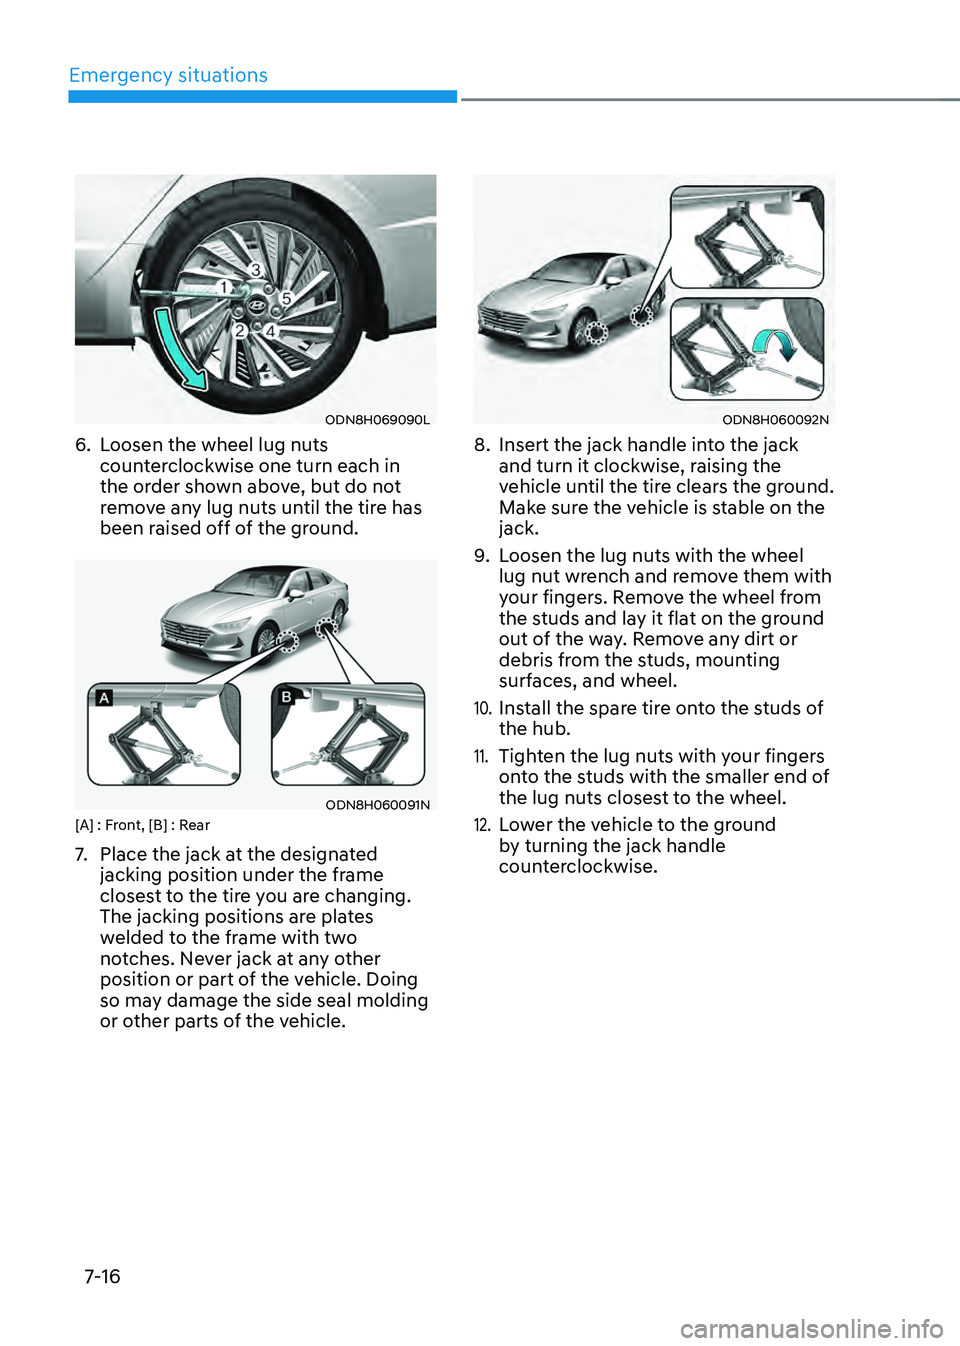 HYUNDAI SONATA HYBRID 2021  Owners Manual Emergency situations
7-16
ODN8H069090L
6. Loosen the wheel lug nuts 
counterclockwise one turn each in 
the order shown above, but do not 
remove any lug nuts until the tire has 
been raised off of th